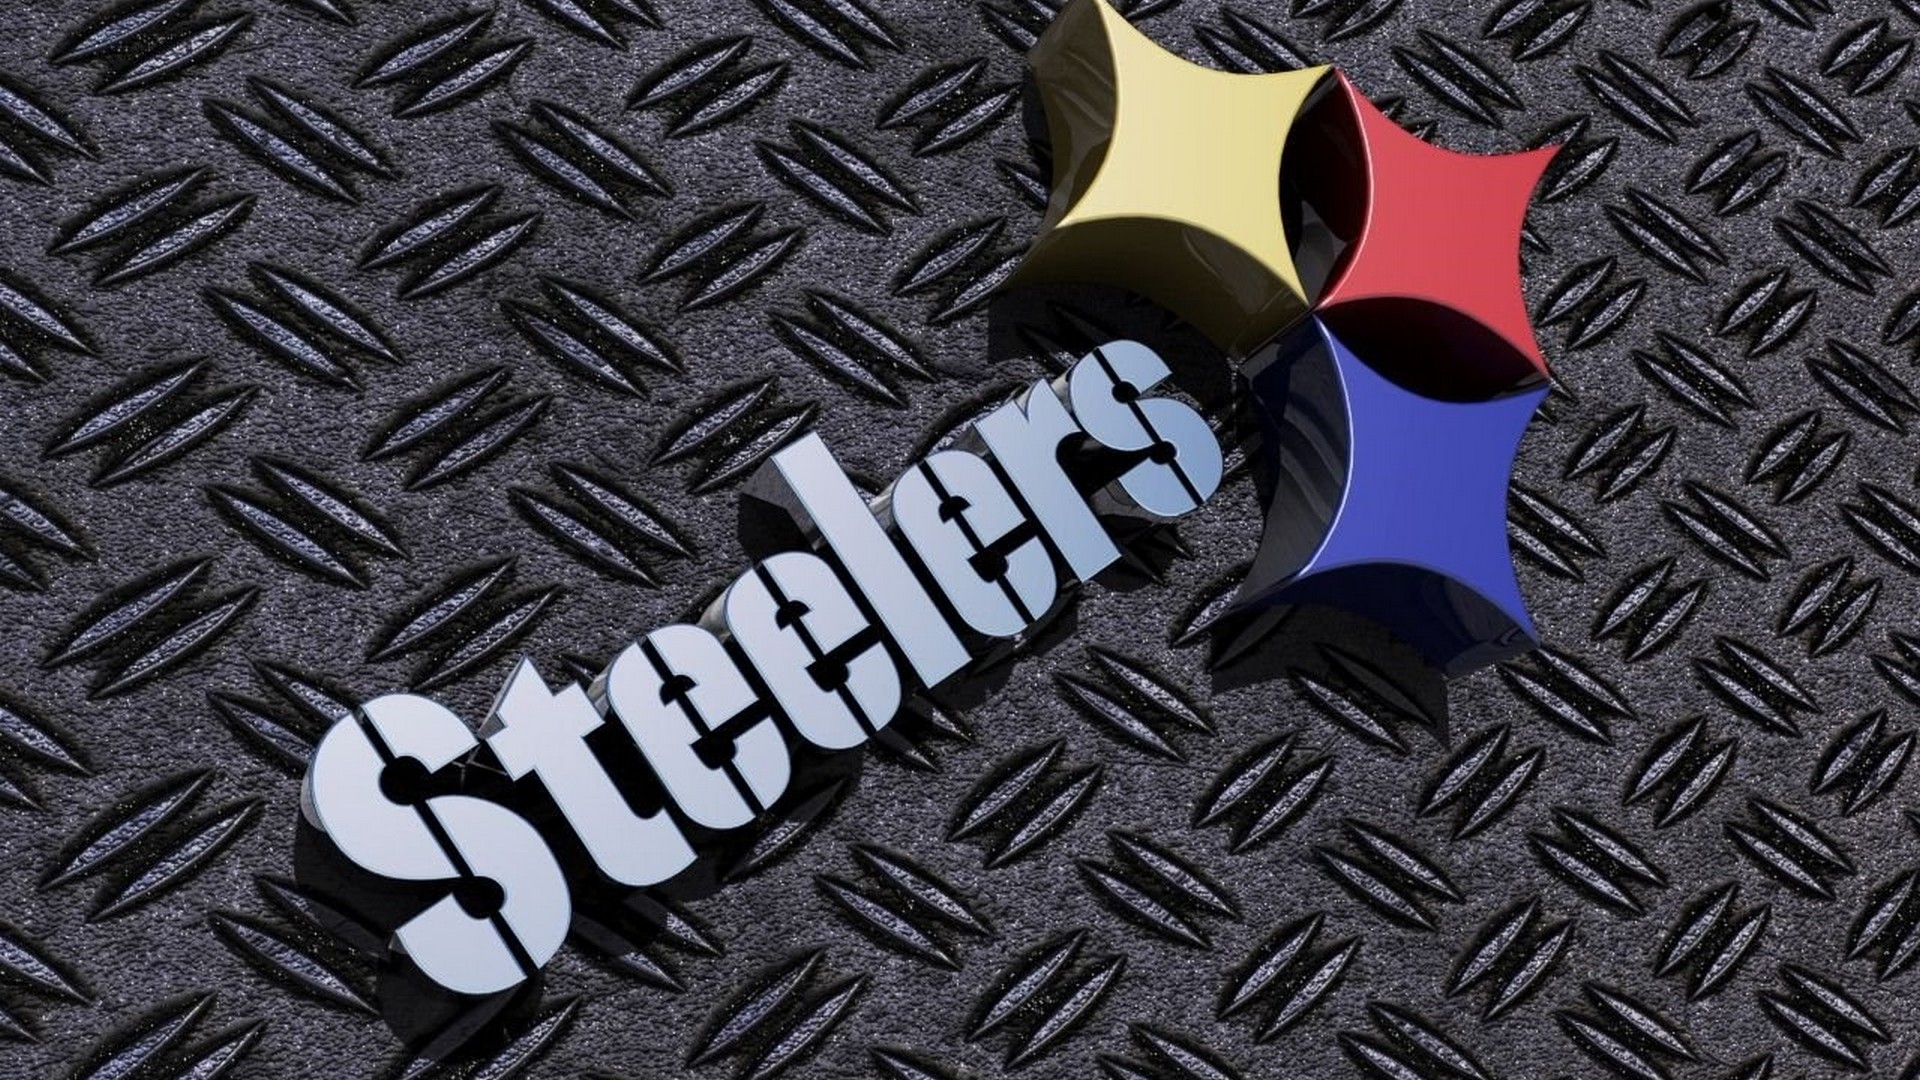 Pitt Steelers Wallpaper with resolution 1920x1080 pixel. You can make this wallpaper for your Mac or Windows Desktop Background, iPhone, Android or Tablet and another Smartphone device